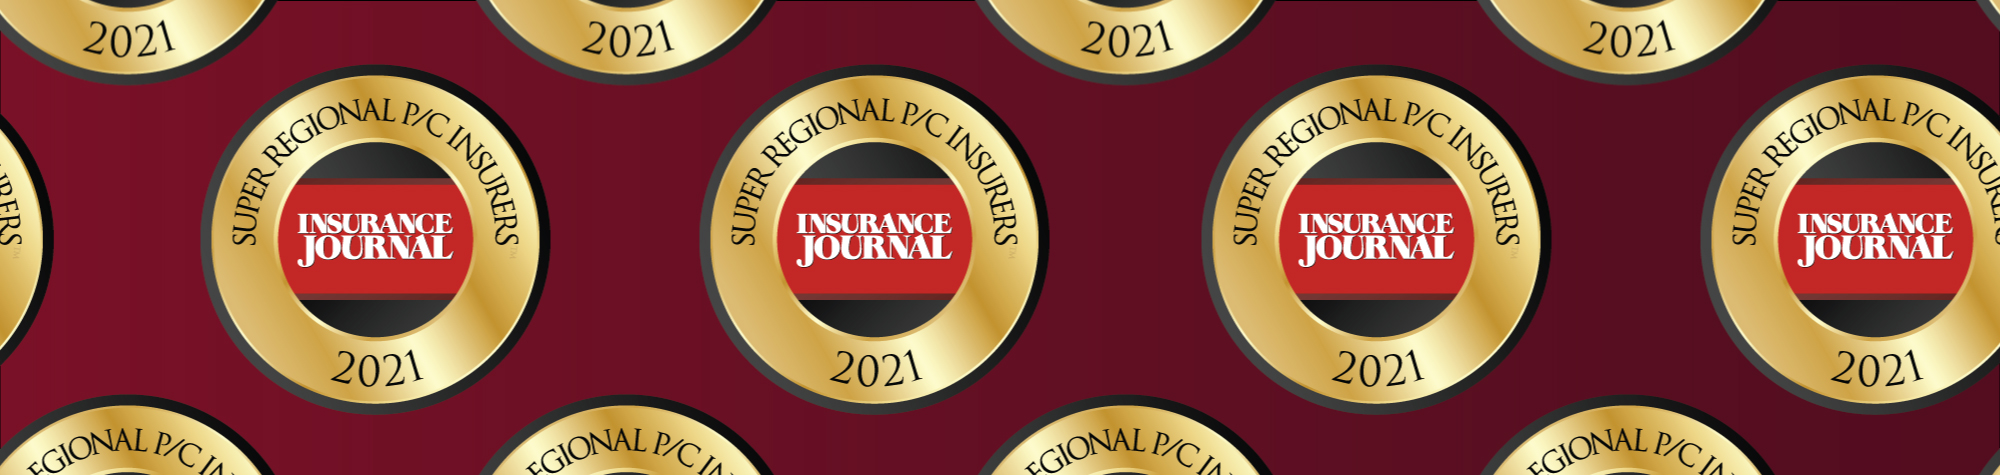 Merchants Mutual Insurance Company Named a “Super Regional Property/Casualty Insurer” by Insurance Journal